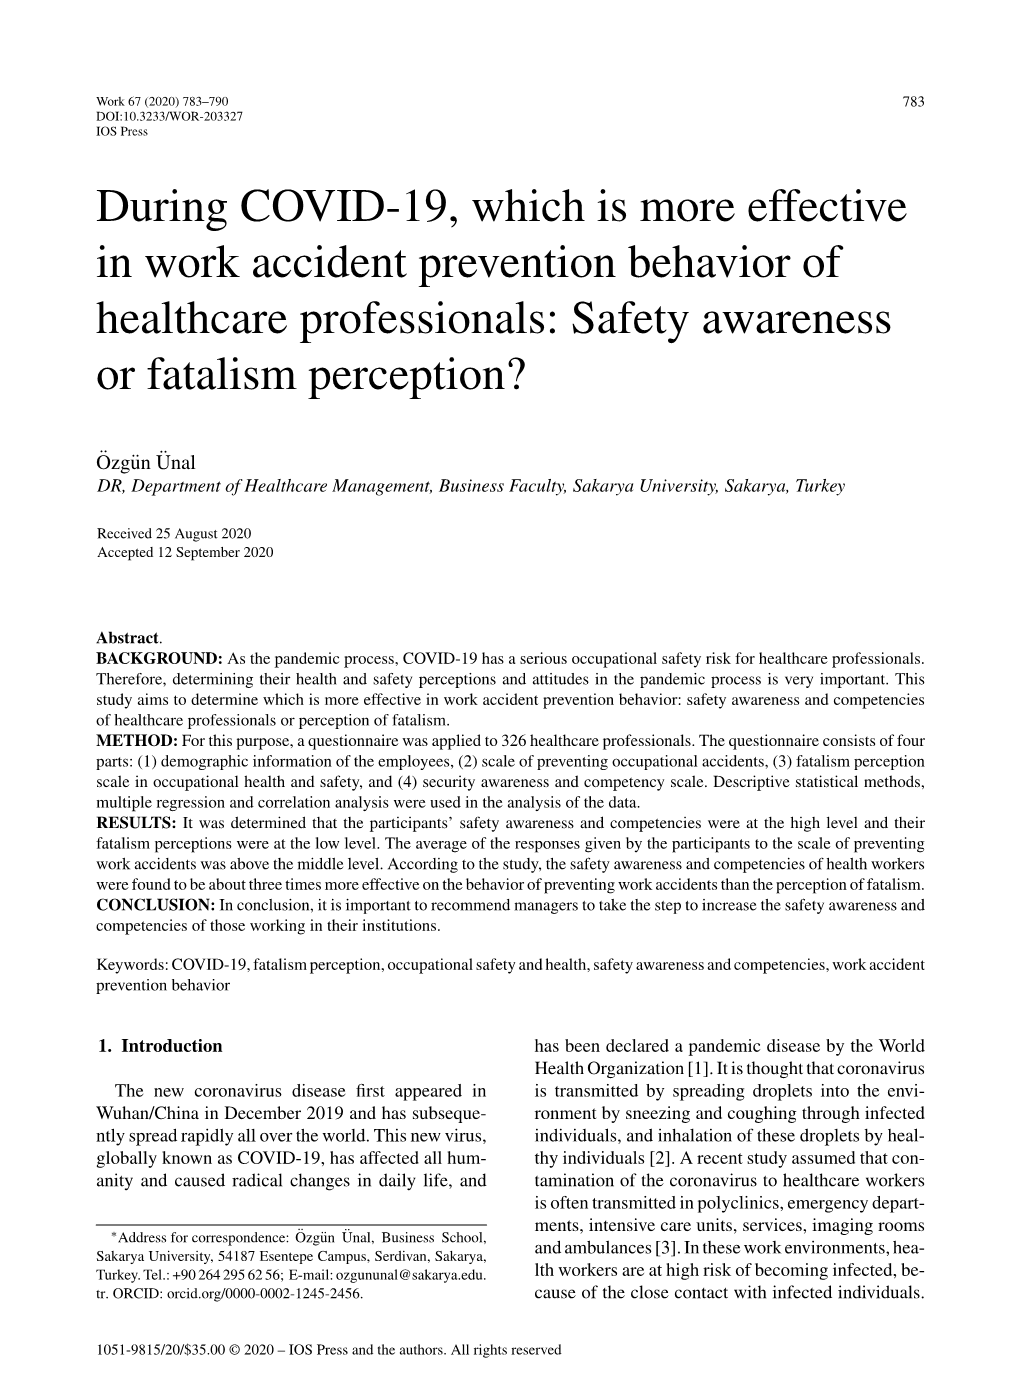 During COVID-19, Which Is More Effective in Work Accident Prevention Behavior of Healthcare Professionals: Safety Awareness Or Fatalism Perception?